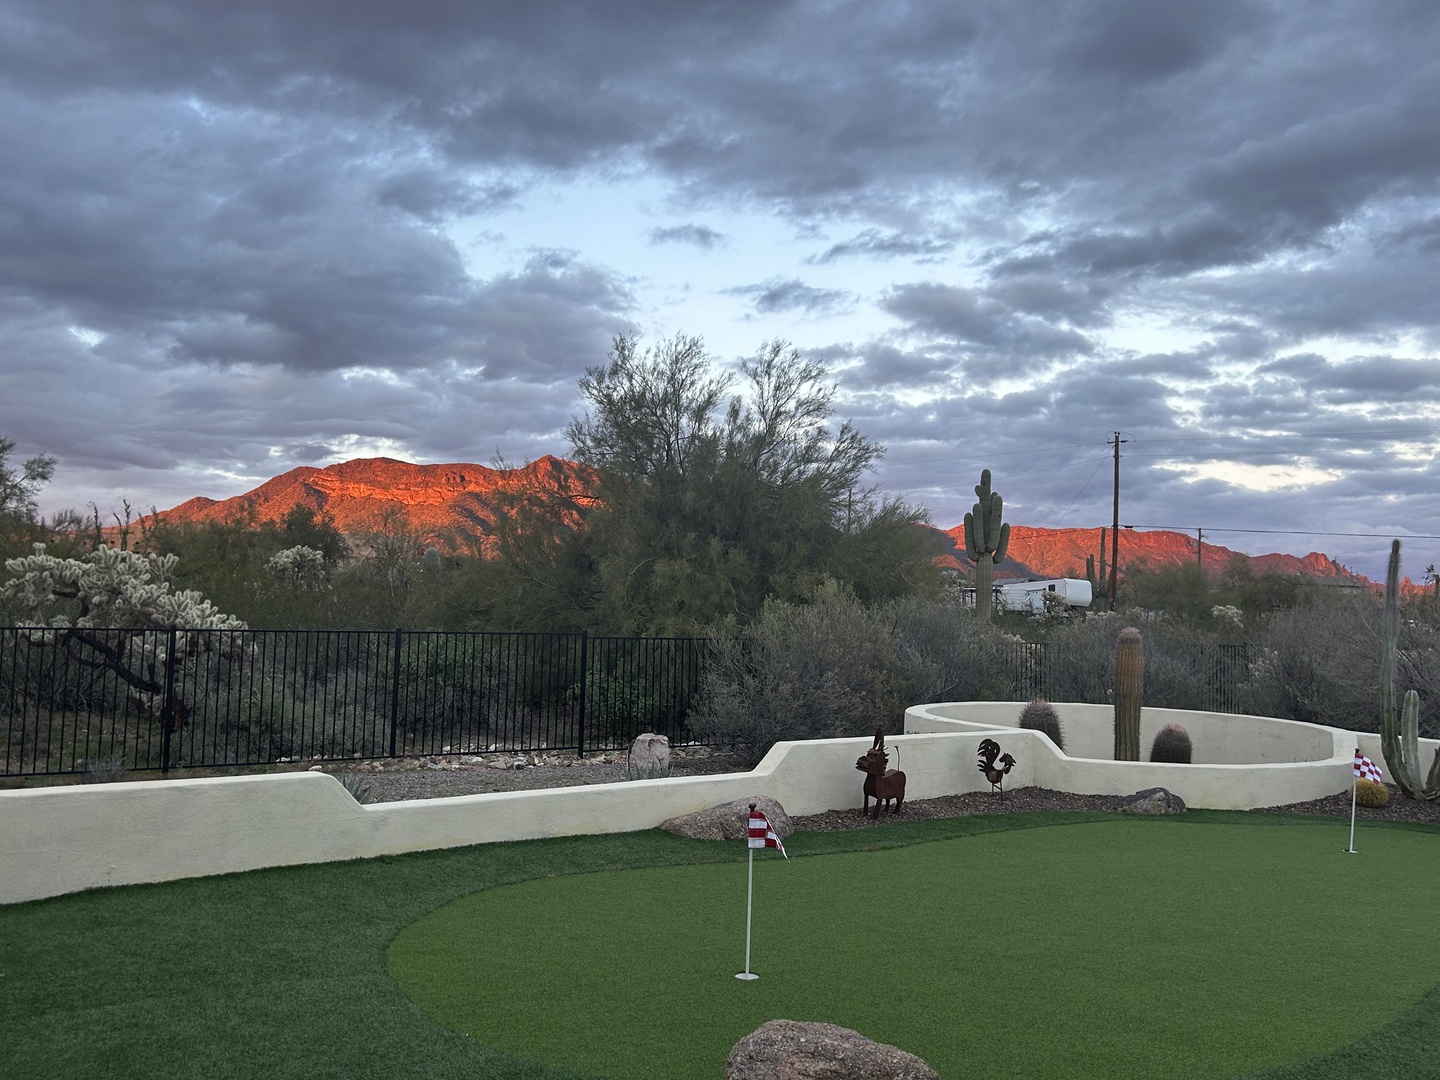 Enjoy impeccable sunsets at East Mesa Desert and Mountain Views!